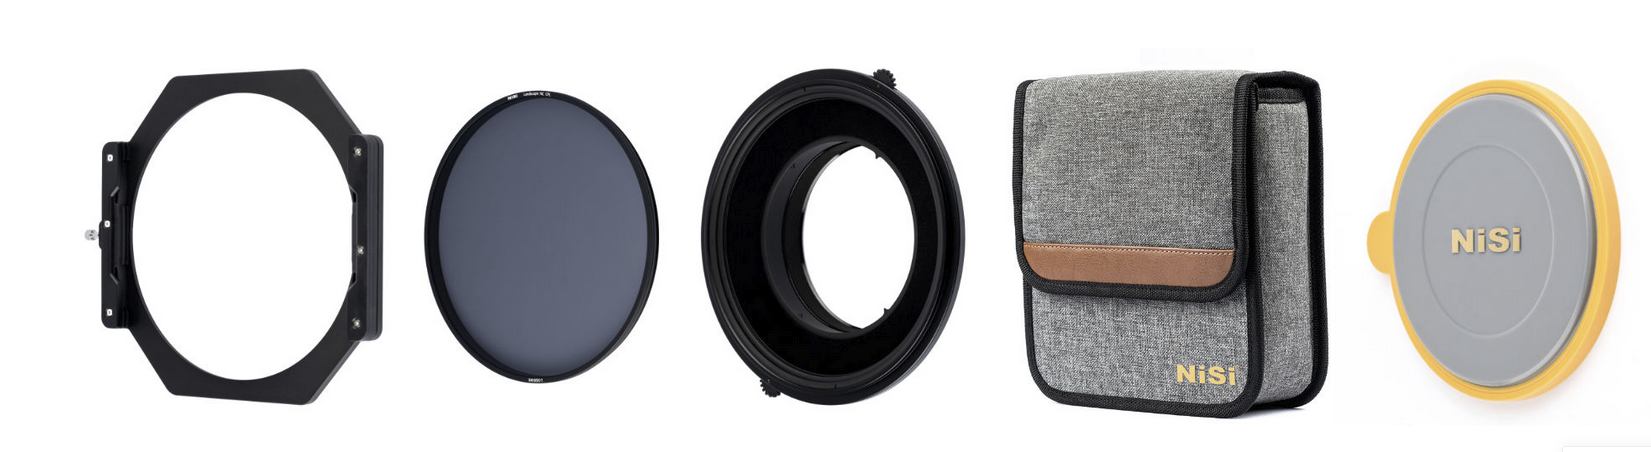 NiSi S6 150mm Filter Holder Kit with Landscape NC CPL or PRO CPL